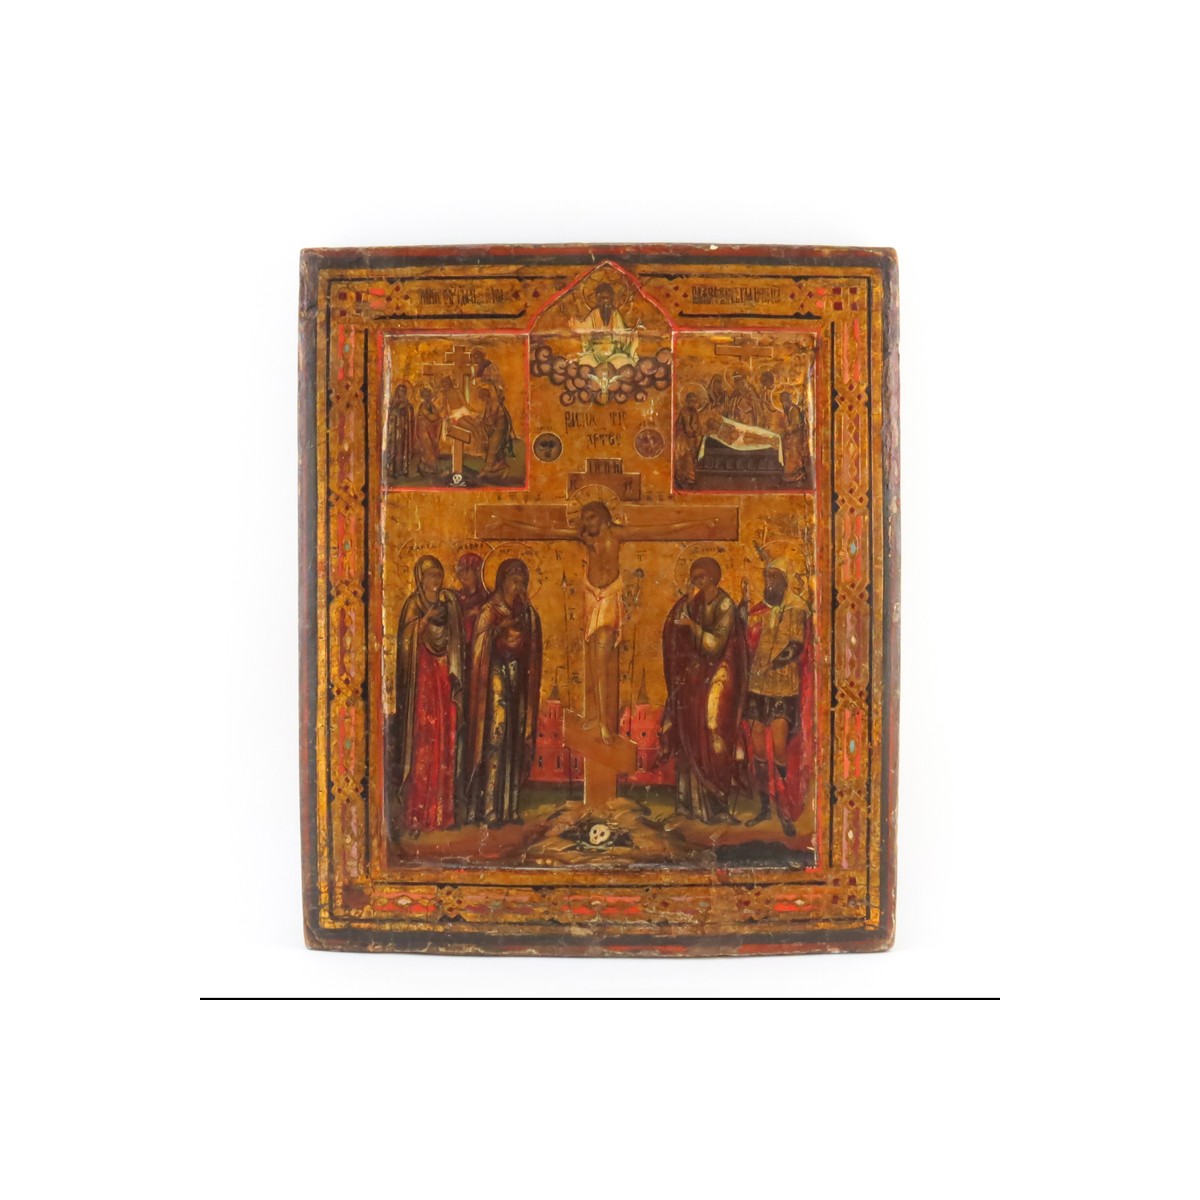 18th Century Russian Painted and Parcel Gilt Icon on Panel Depicting the Crucifixion of Christ. War